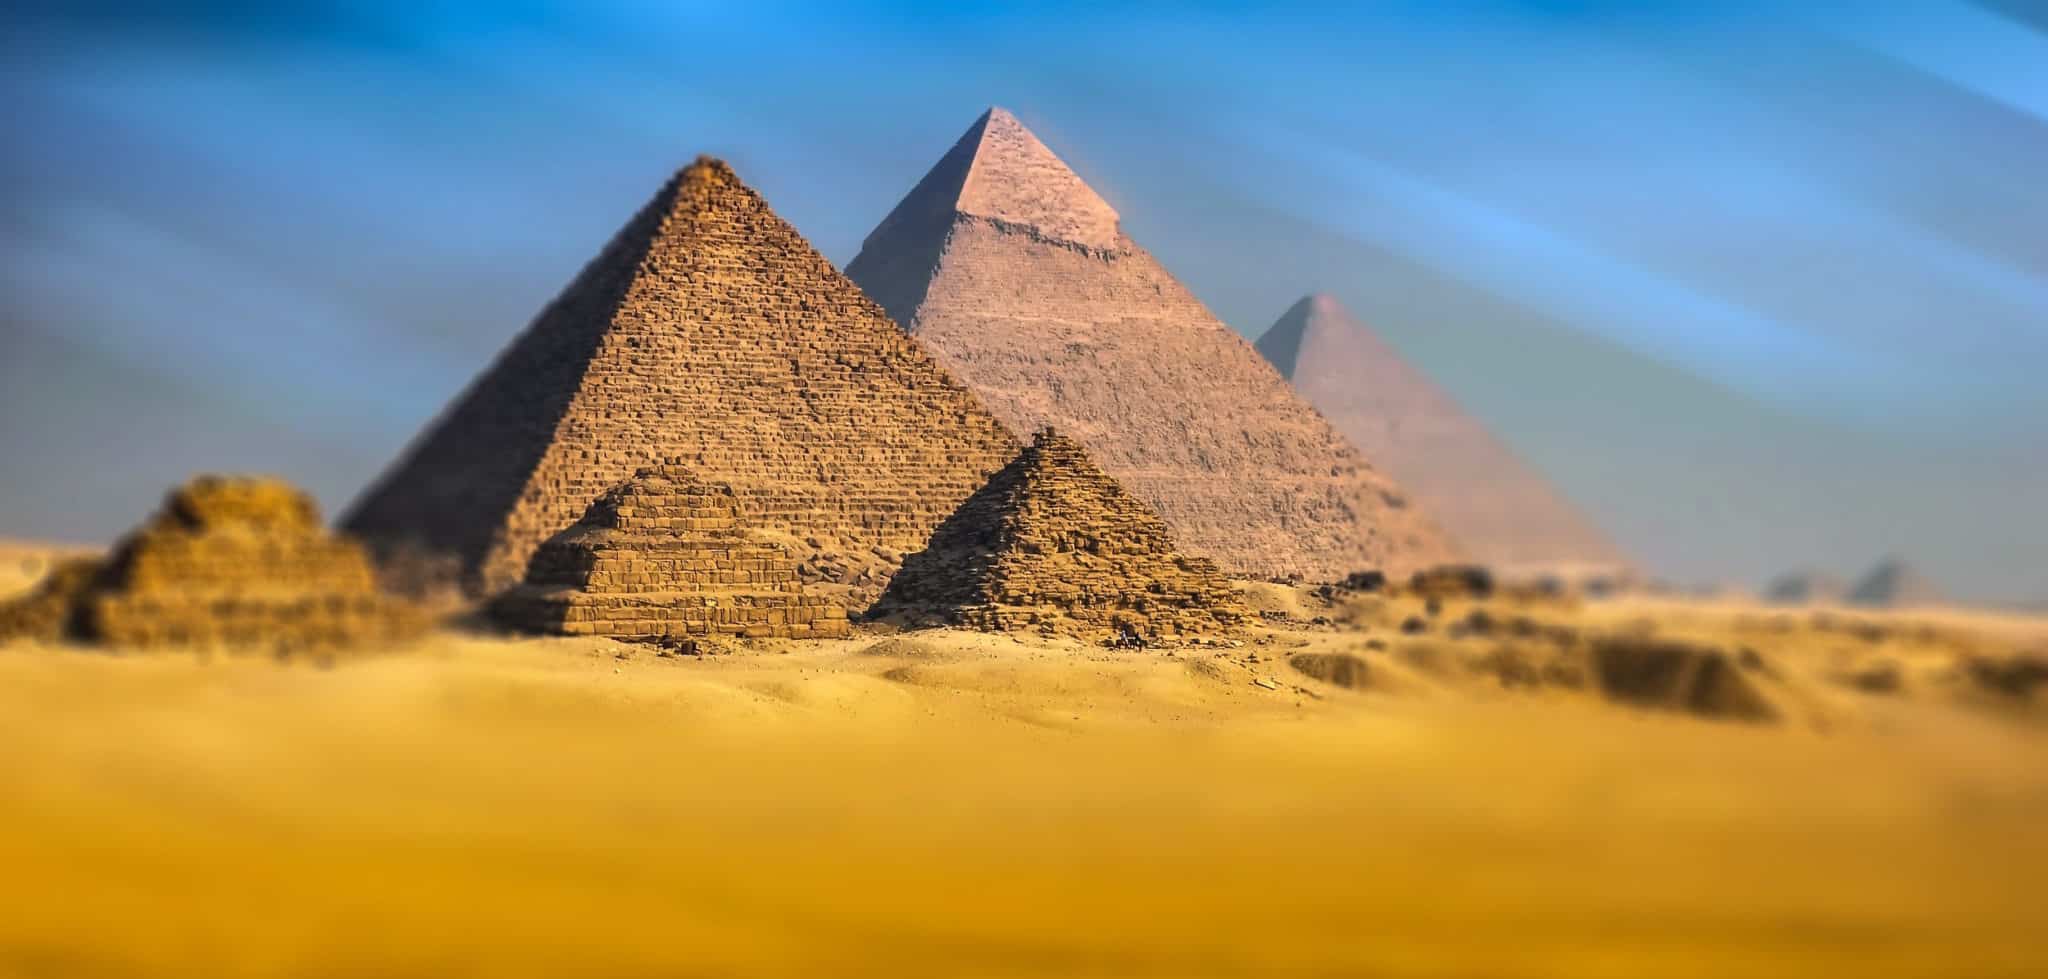 Full View of the Pyramids of Giza